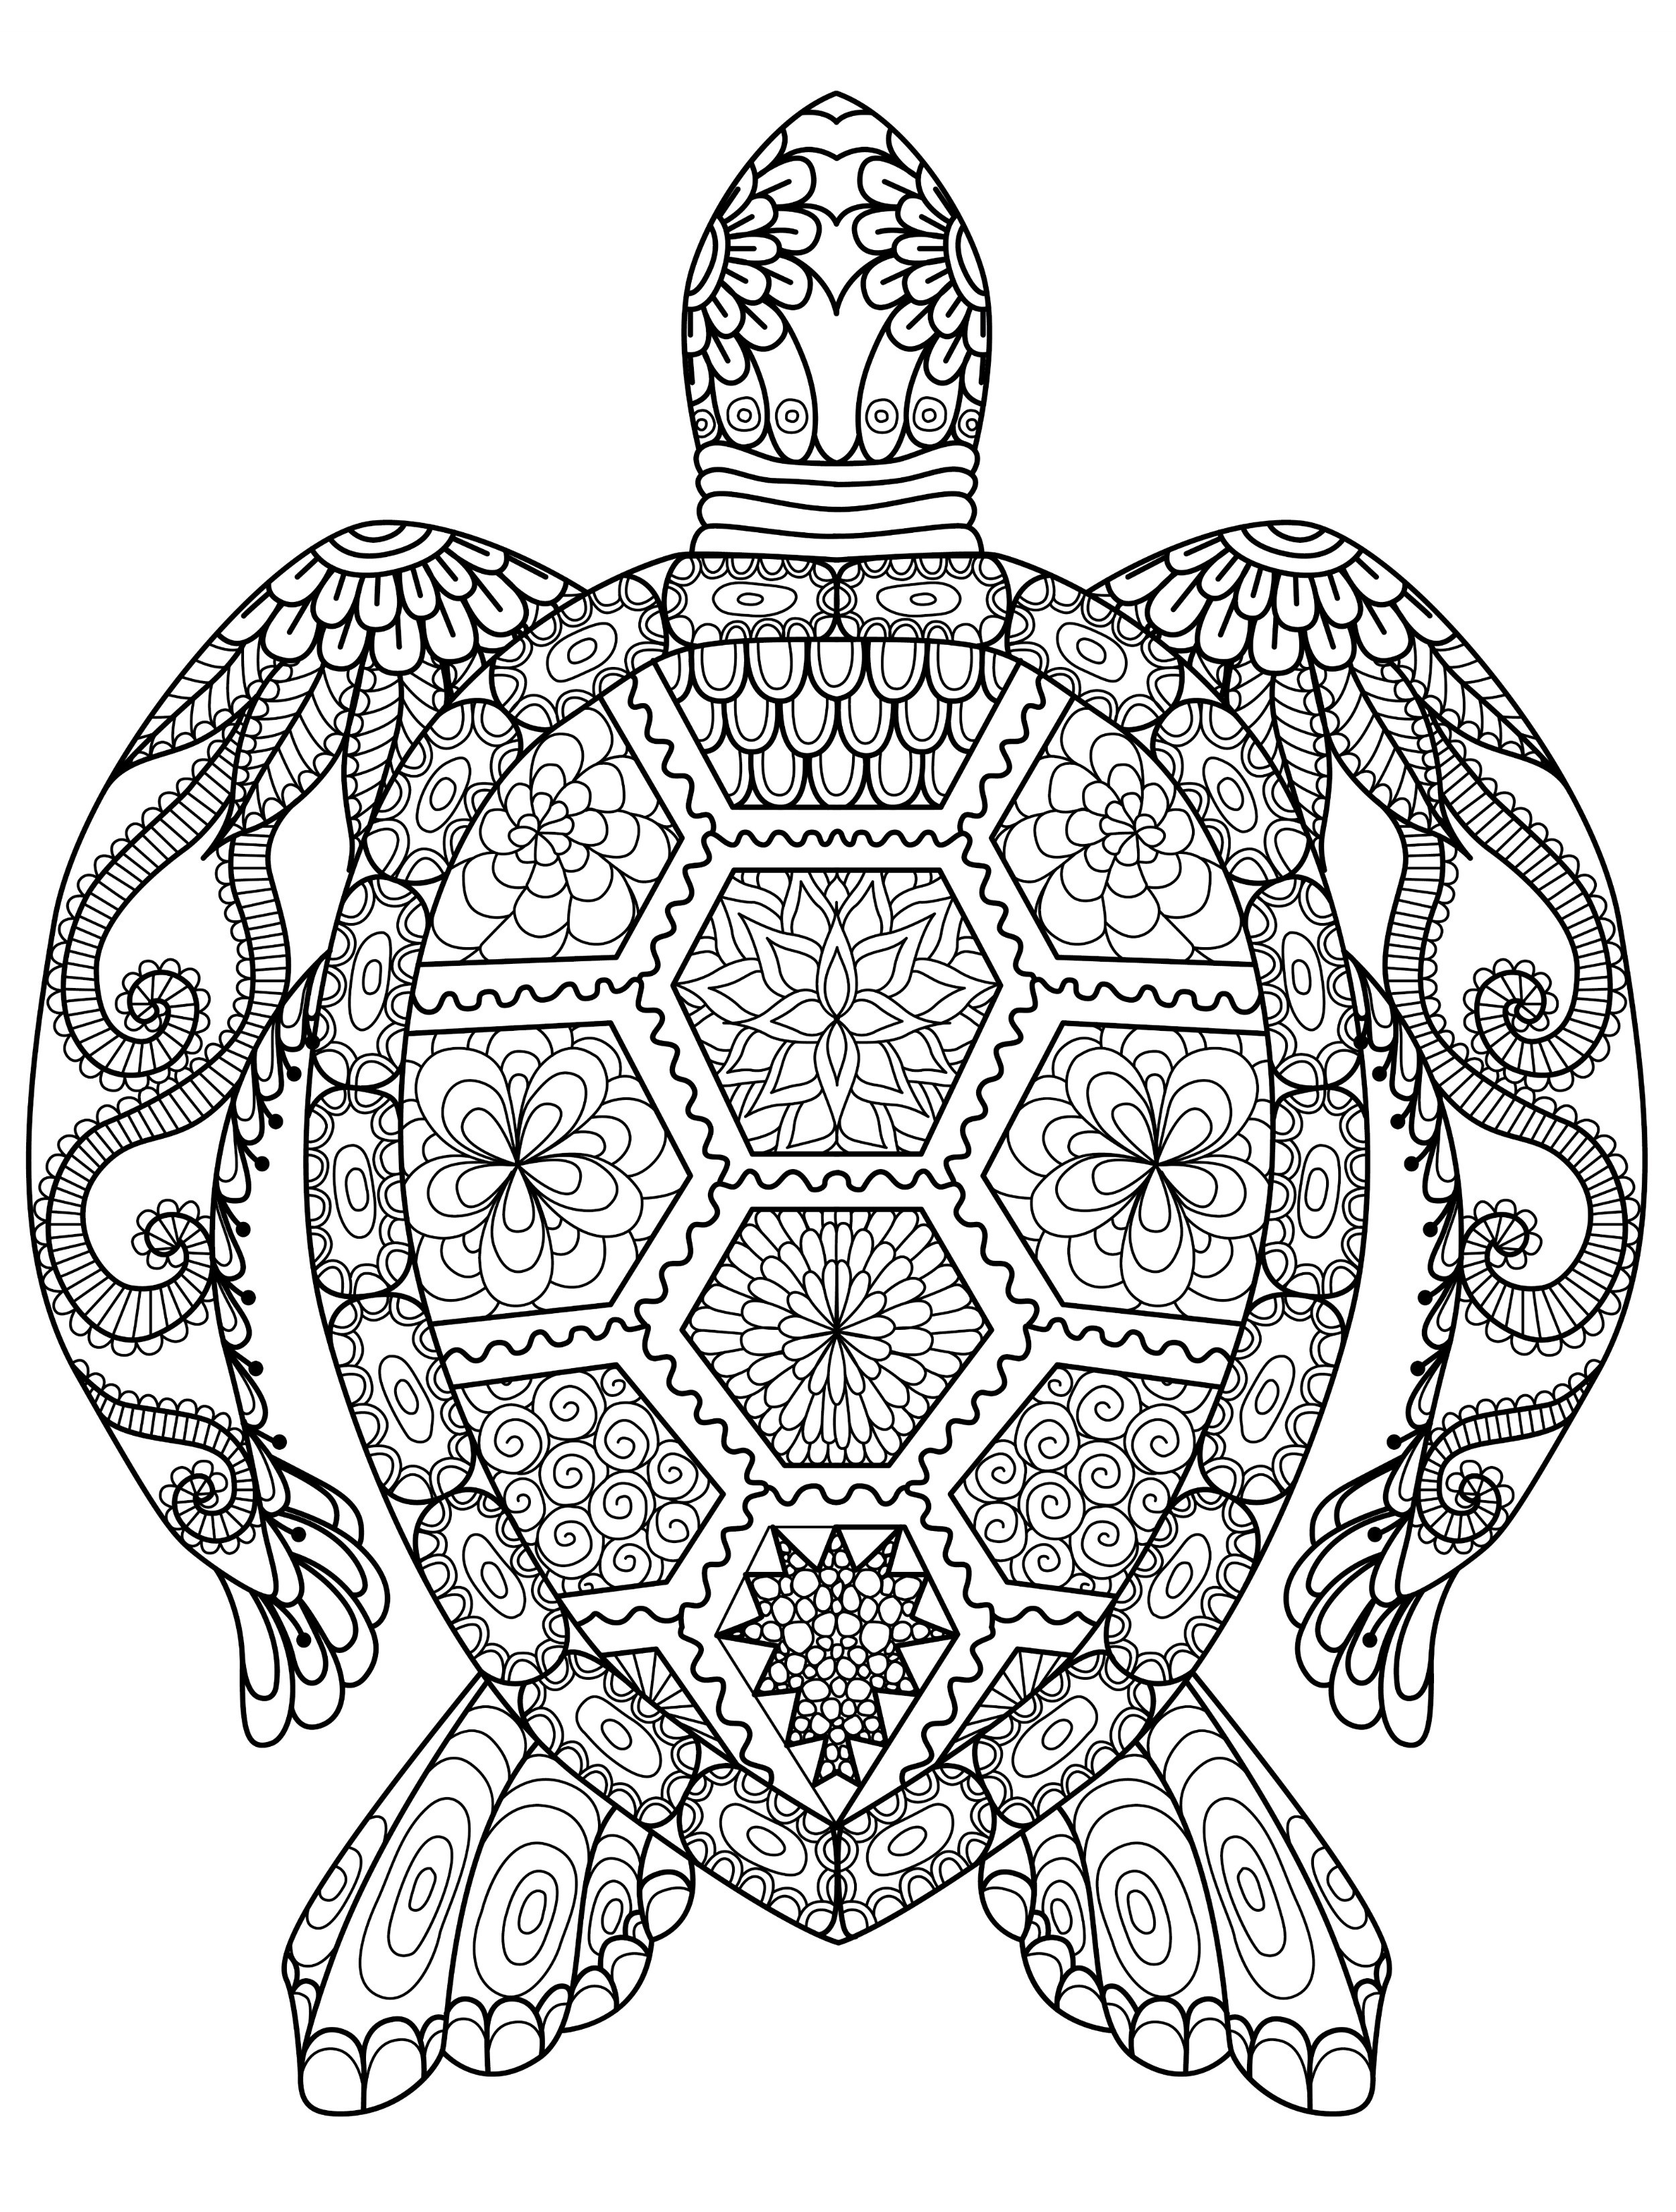 Adult Coloring Pages Animals   Best Coloring Pages For Kids ...